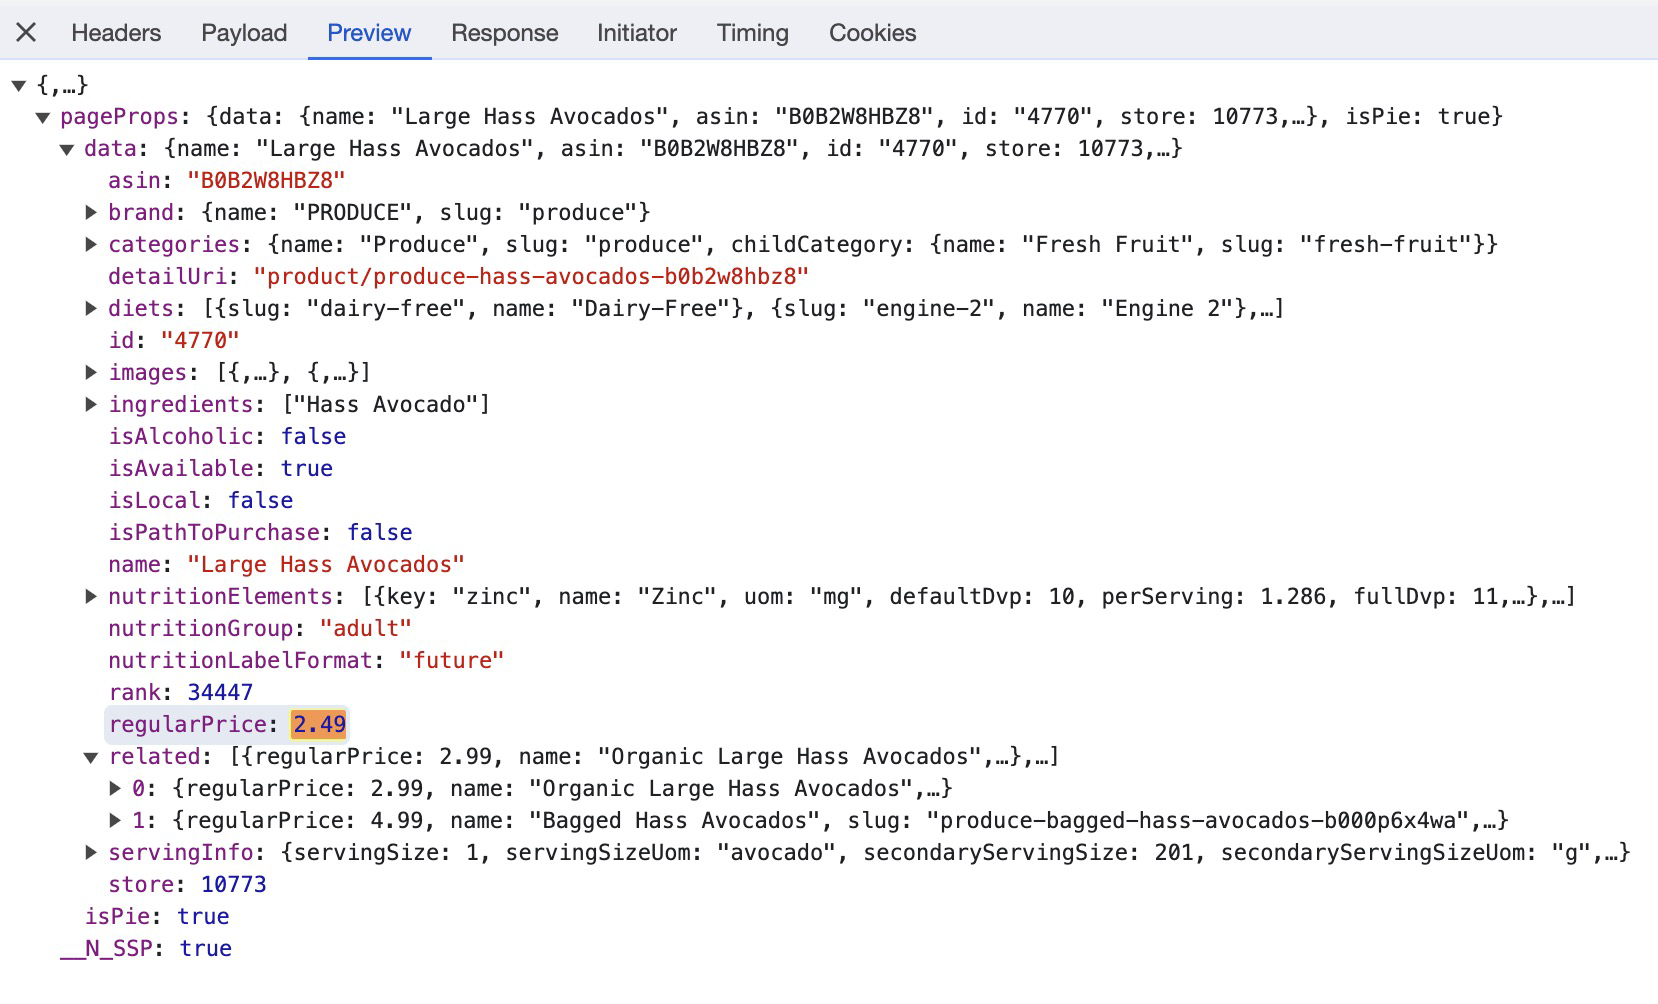 A screenshot from the Inspect Elements Chrome tool, of the preview of the HTTP request response.